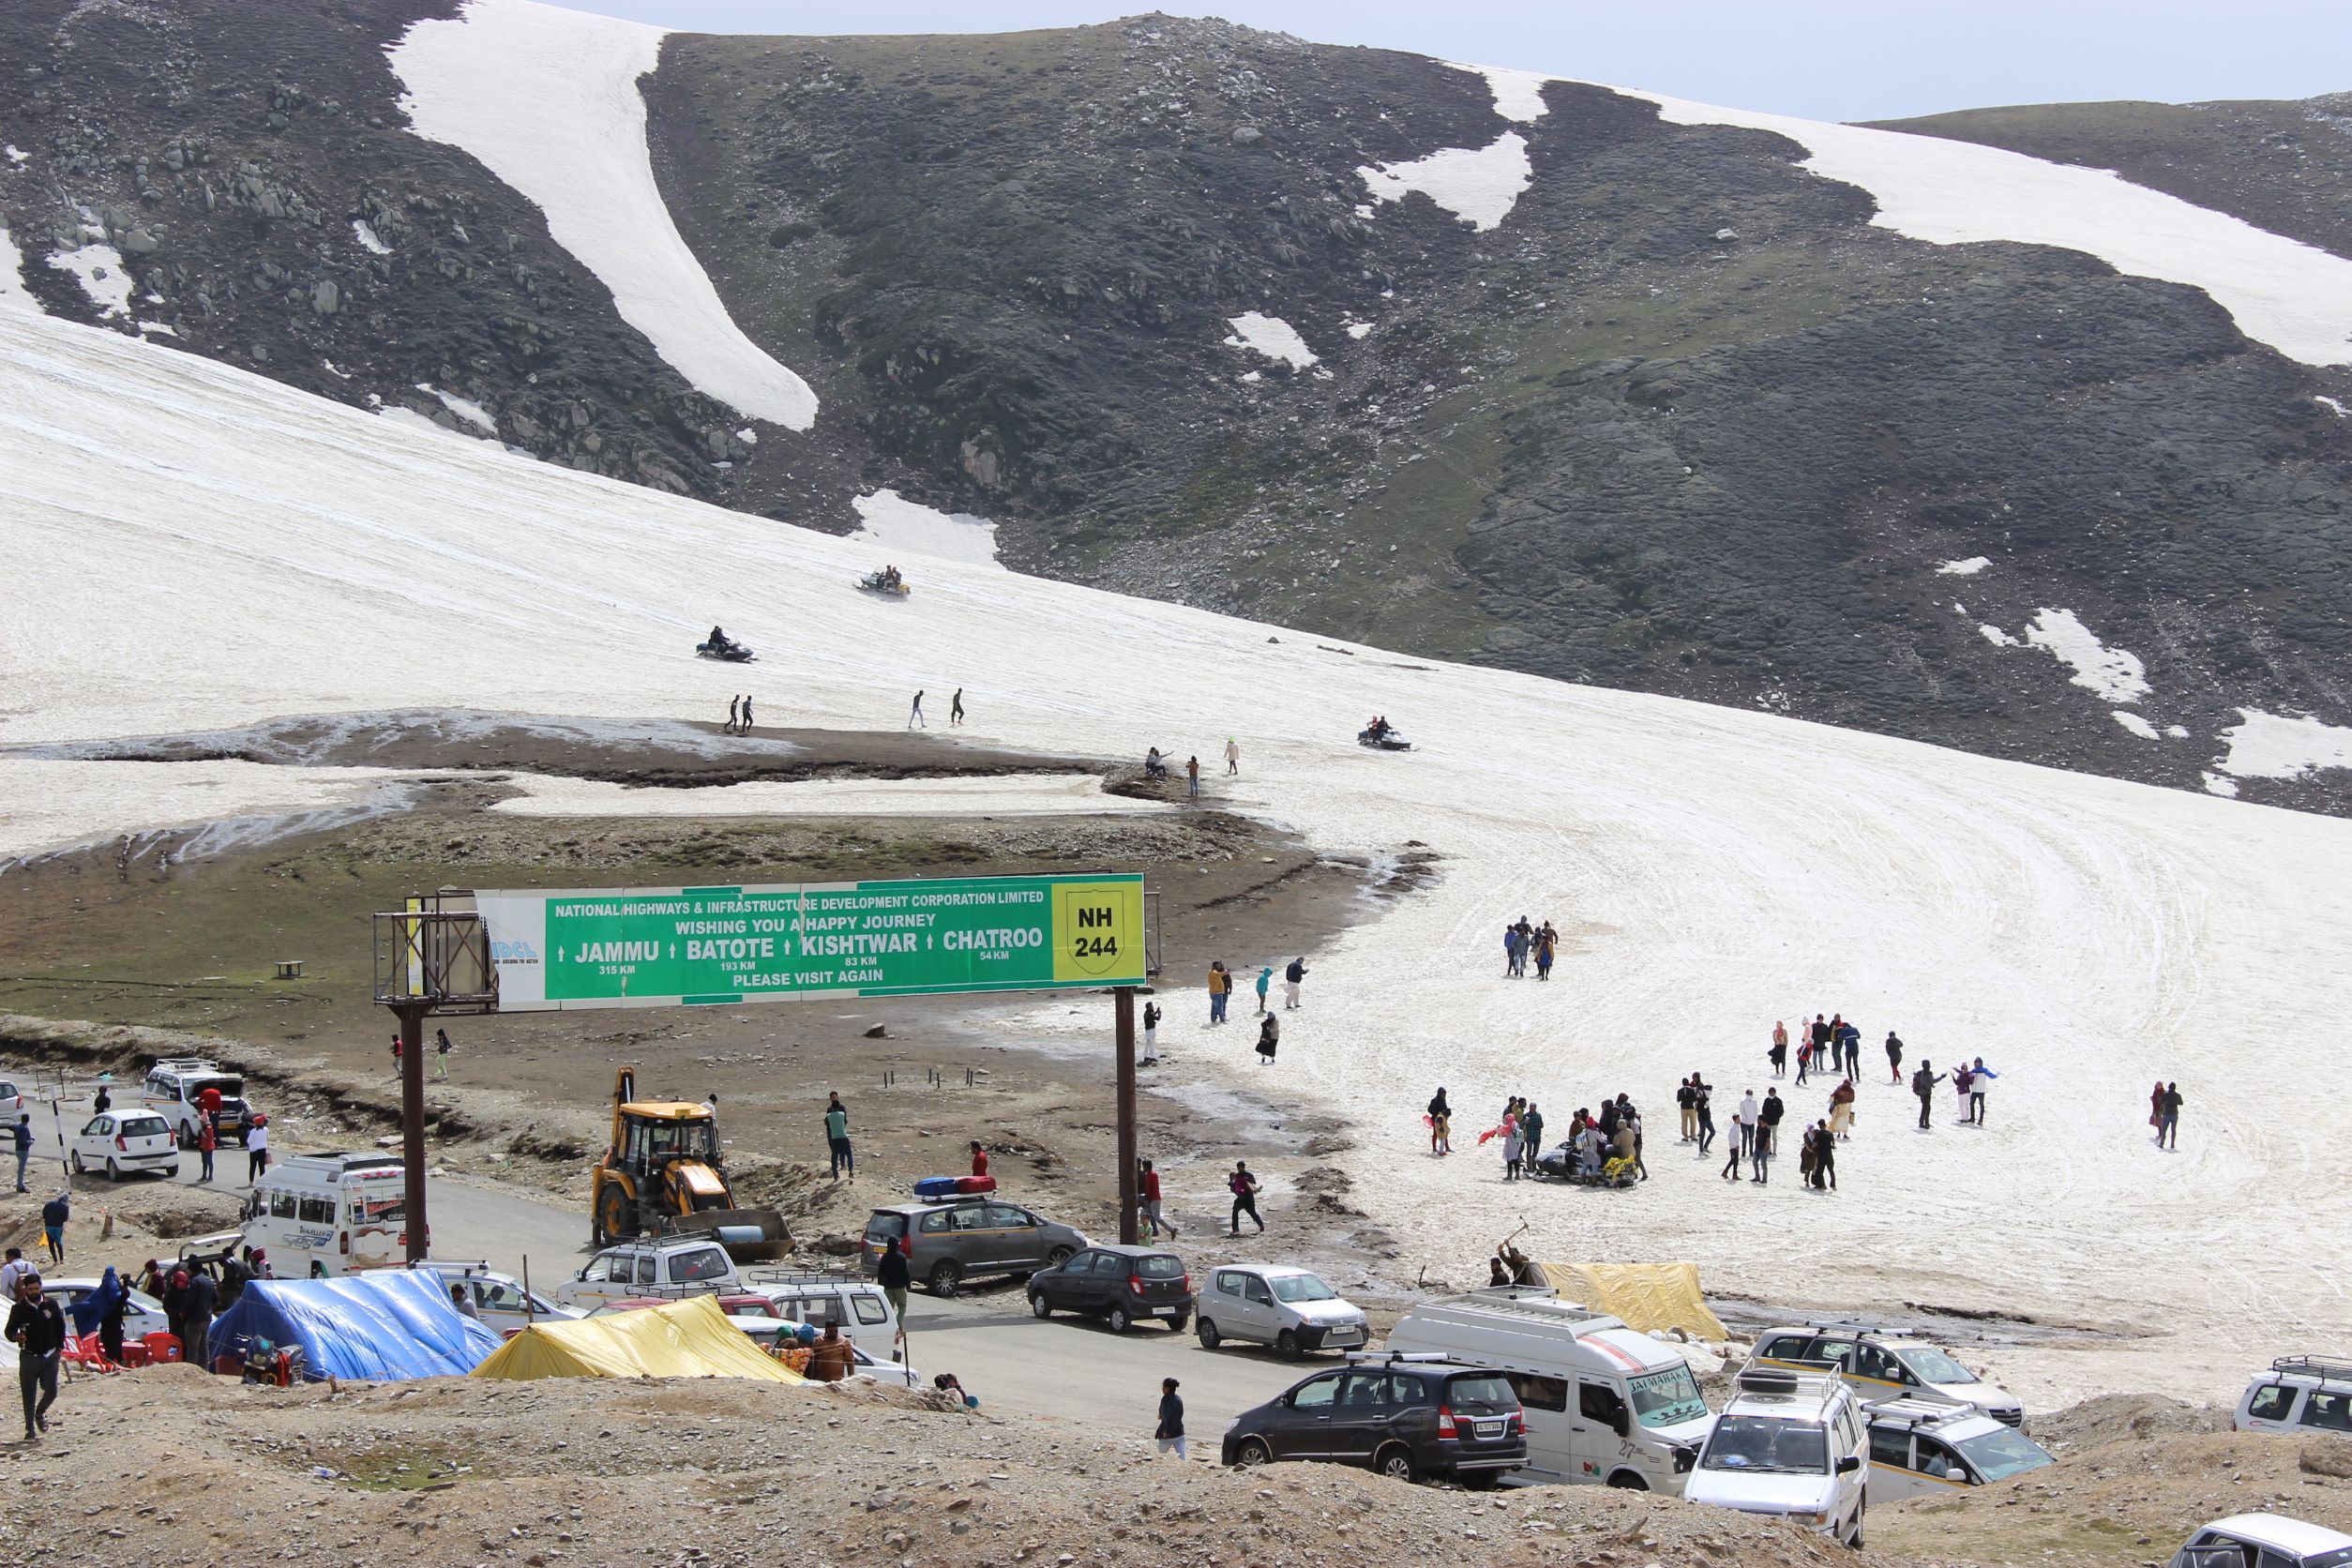 Snow-blanketed Paradise: Sinthan Top Draws Throngs of Tourists